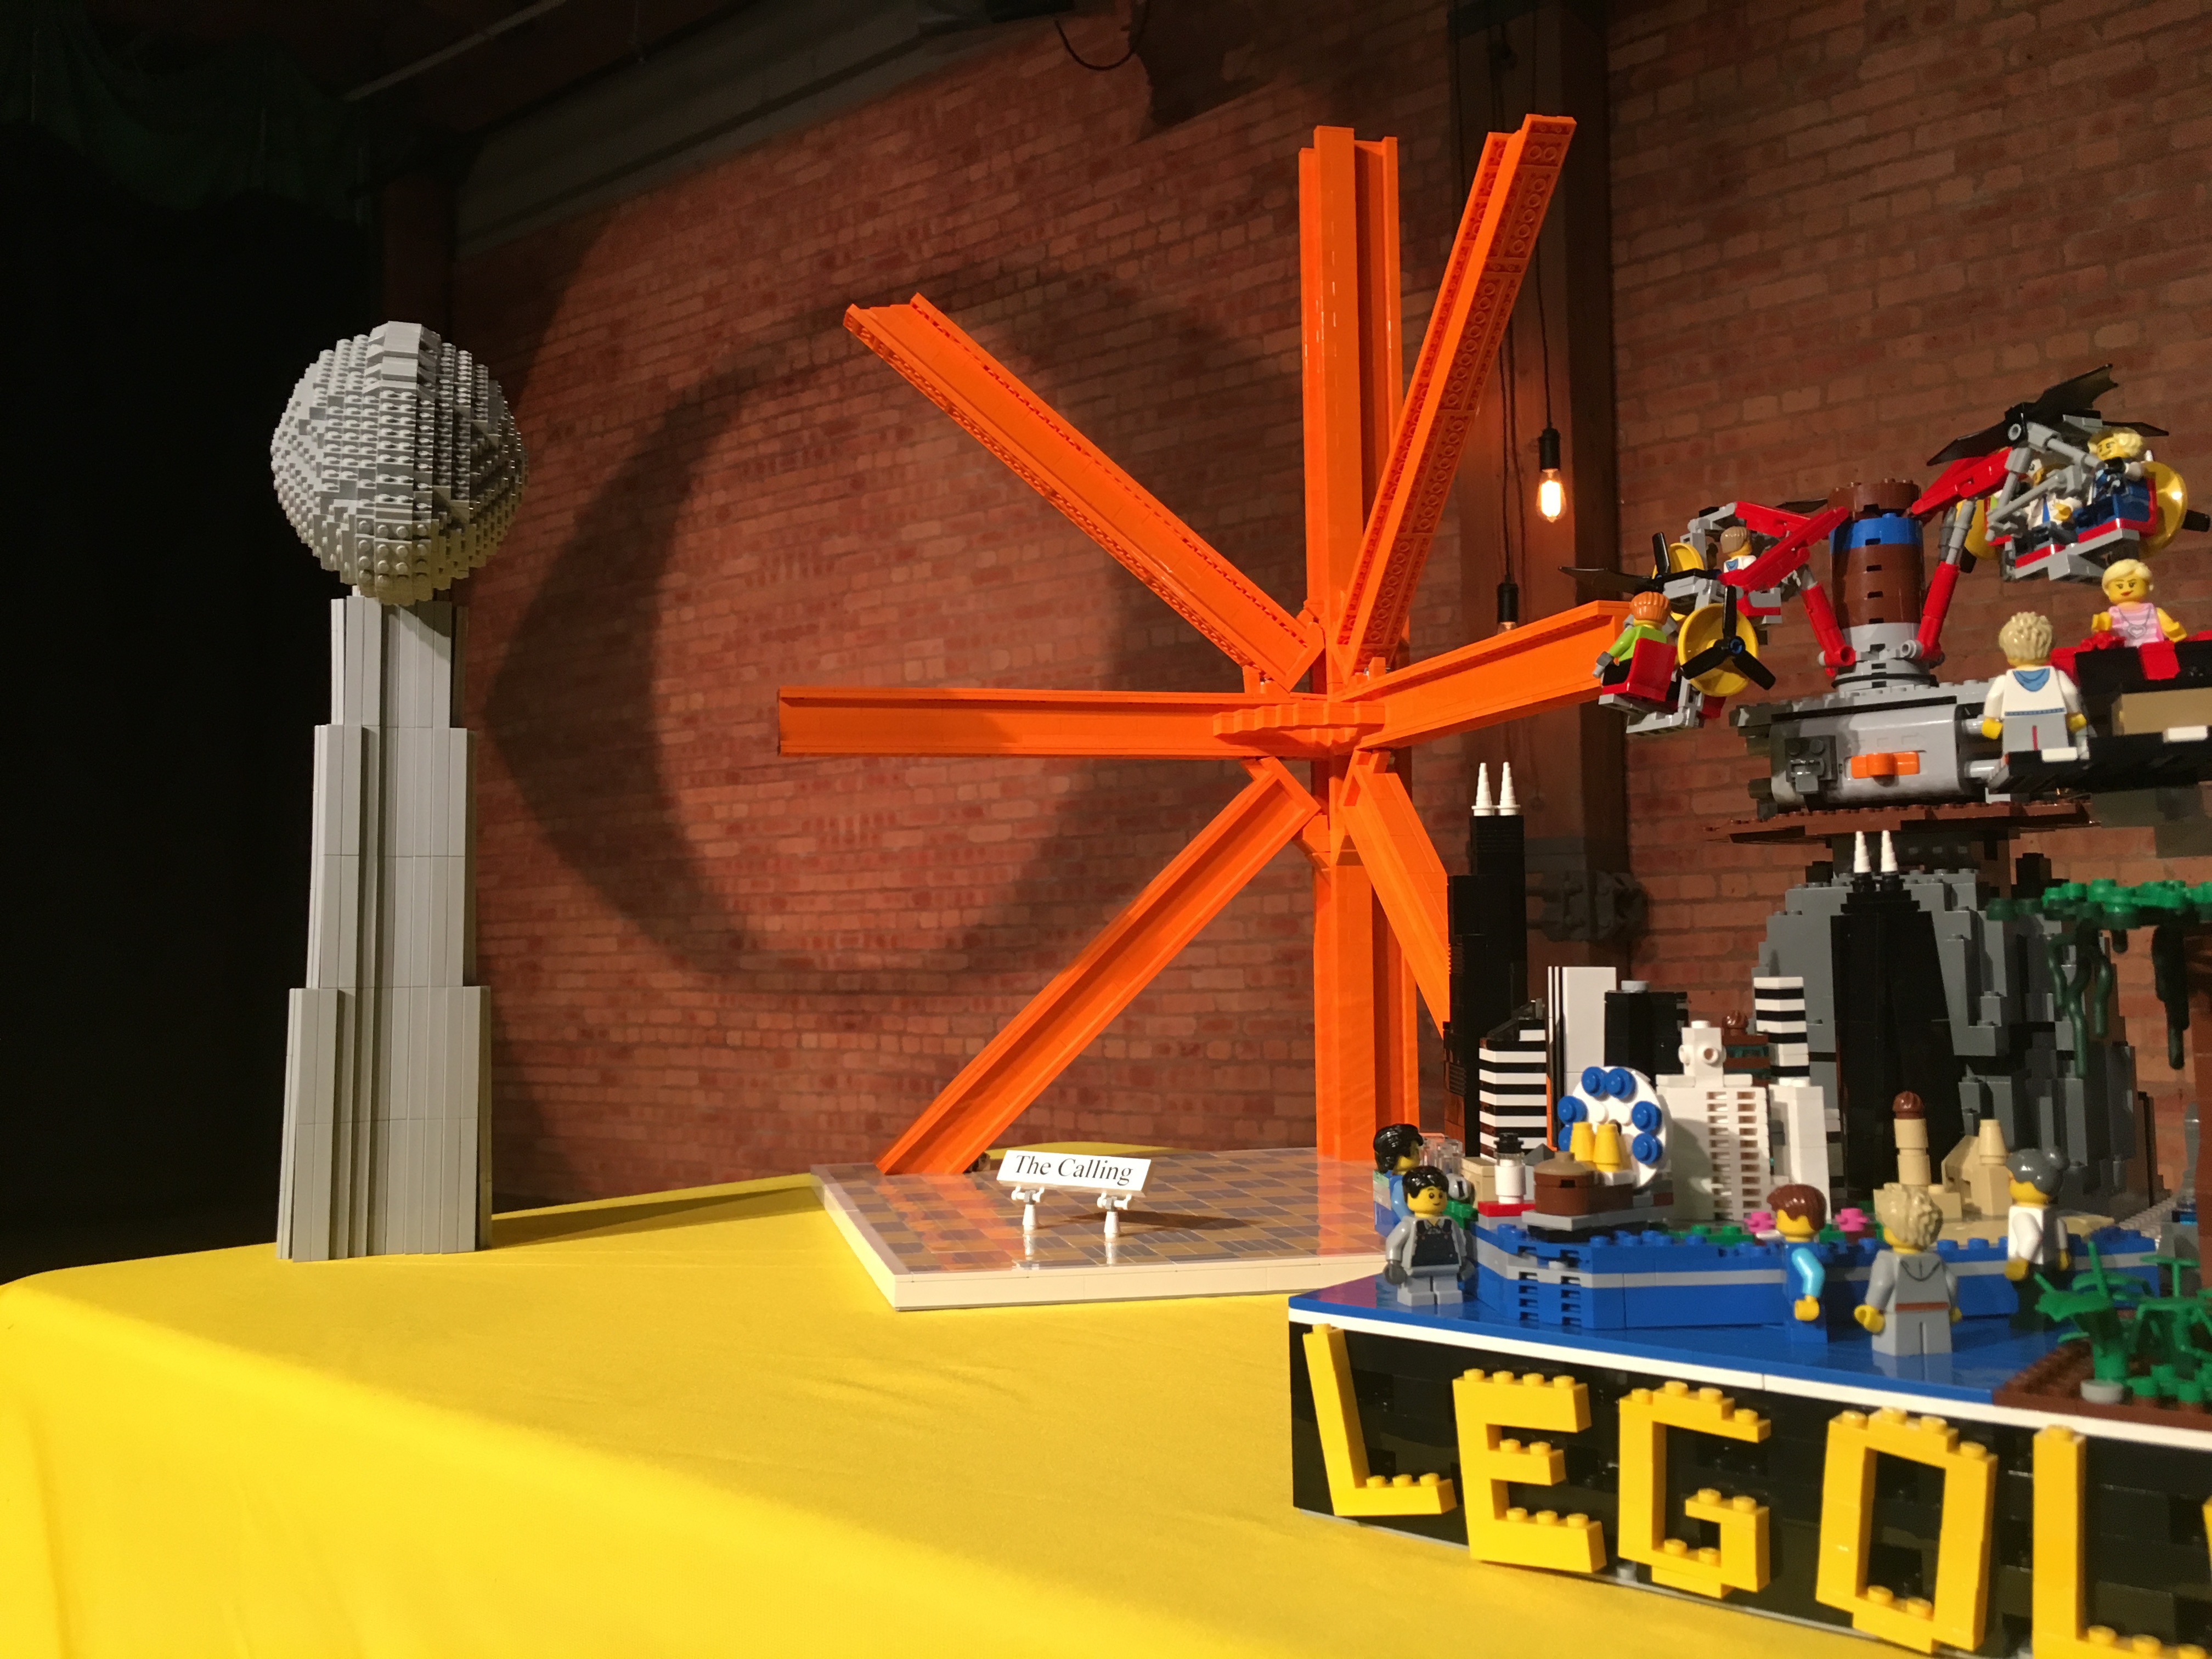 LEGO Master Model Builder Shows Off at CBS 58